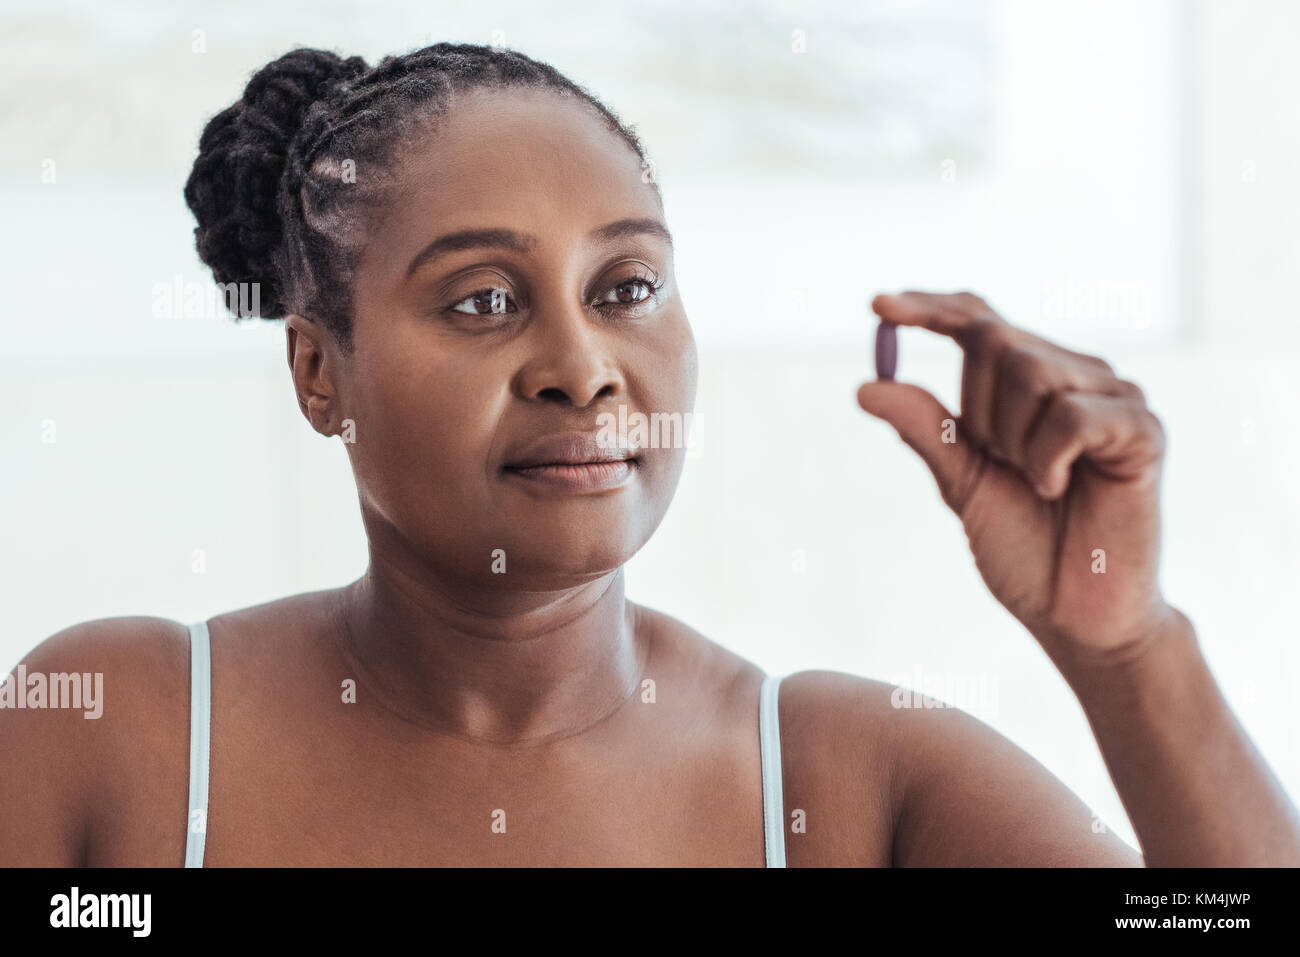 African woman looking at a pill in her hand Stock Photo